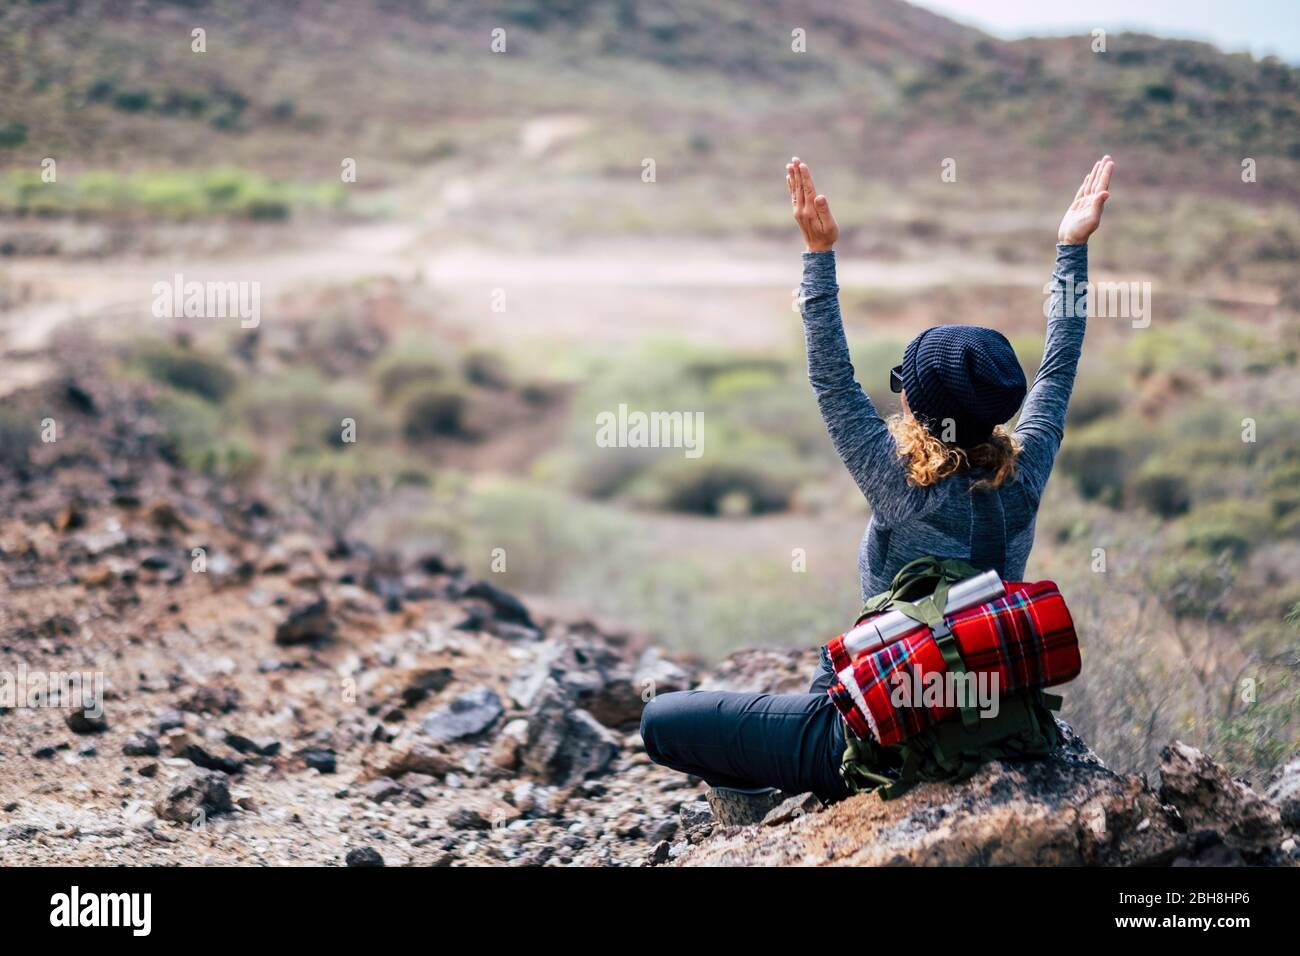 Rear view of woman with blonde curly hair doing yoga position and meditate during travel trekking hiking adventure activity - enjoying and feeling the nature - people healthy lifestyle Stock Photo